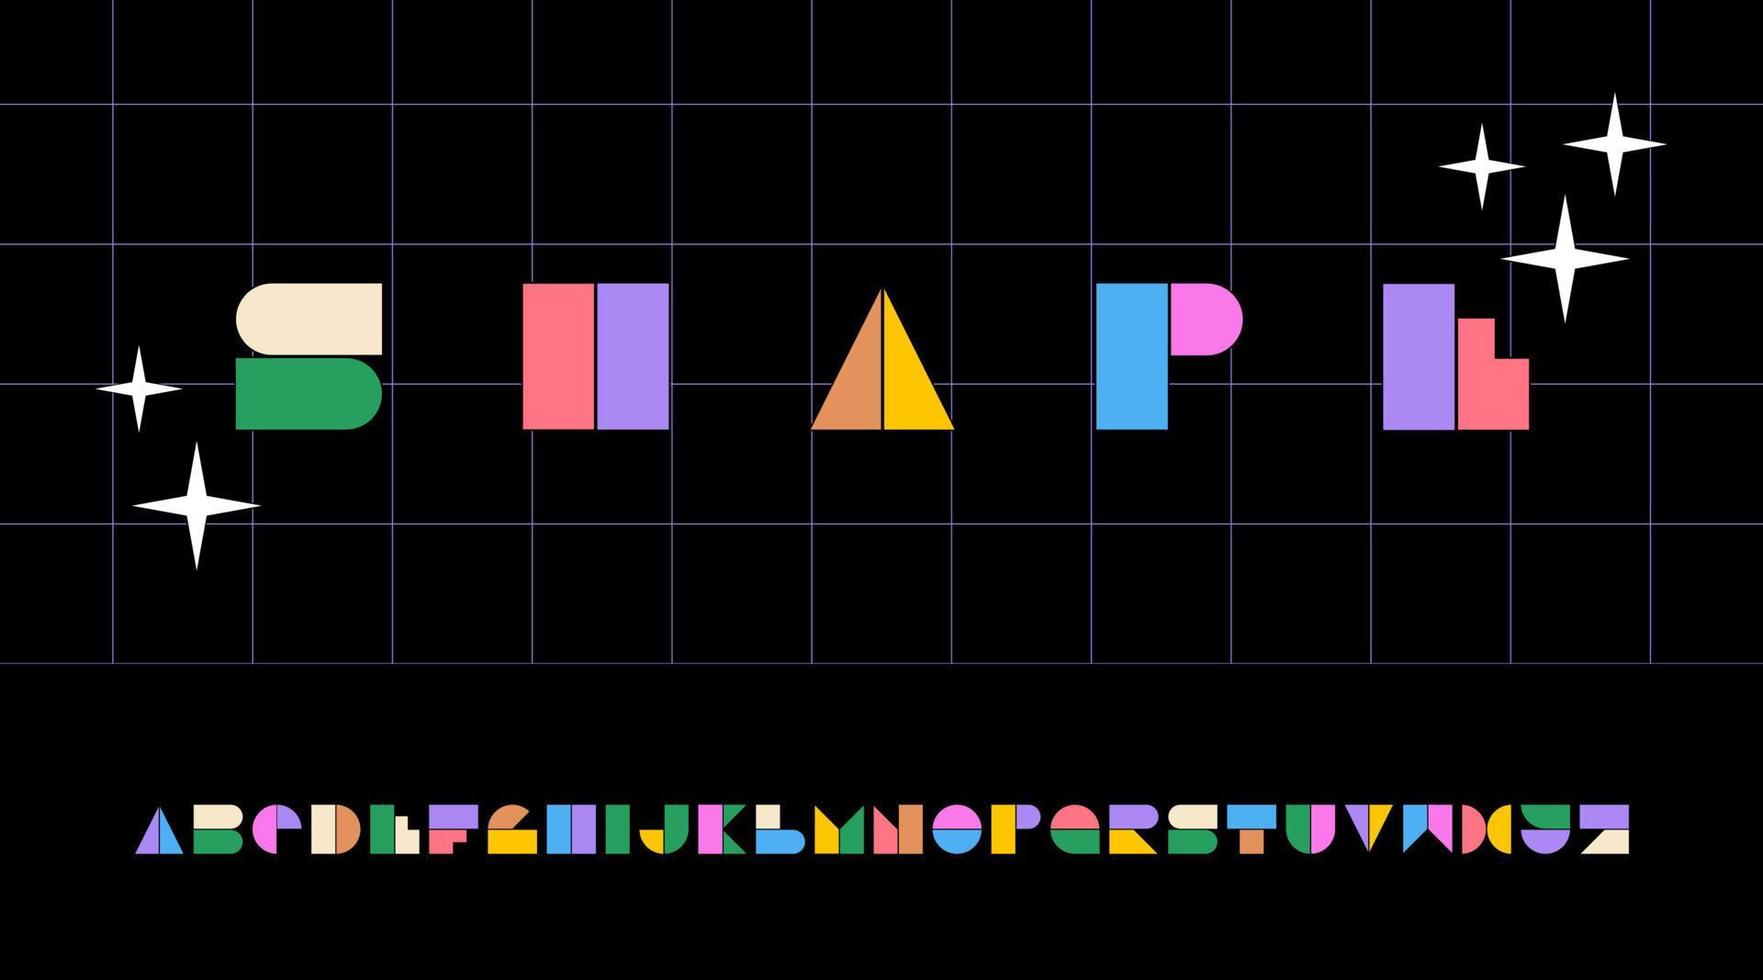 Colorful geometric font. Retro typography in the style of the 90s. Decorative vector typographic design. Alphabet for modern logo, header, bright inscriptions and typographic posters.